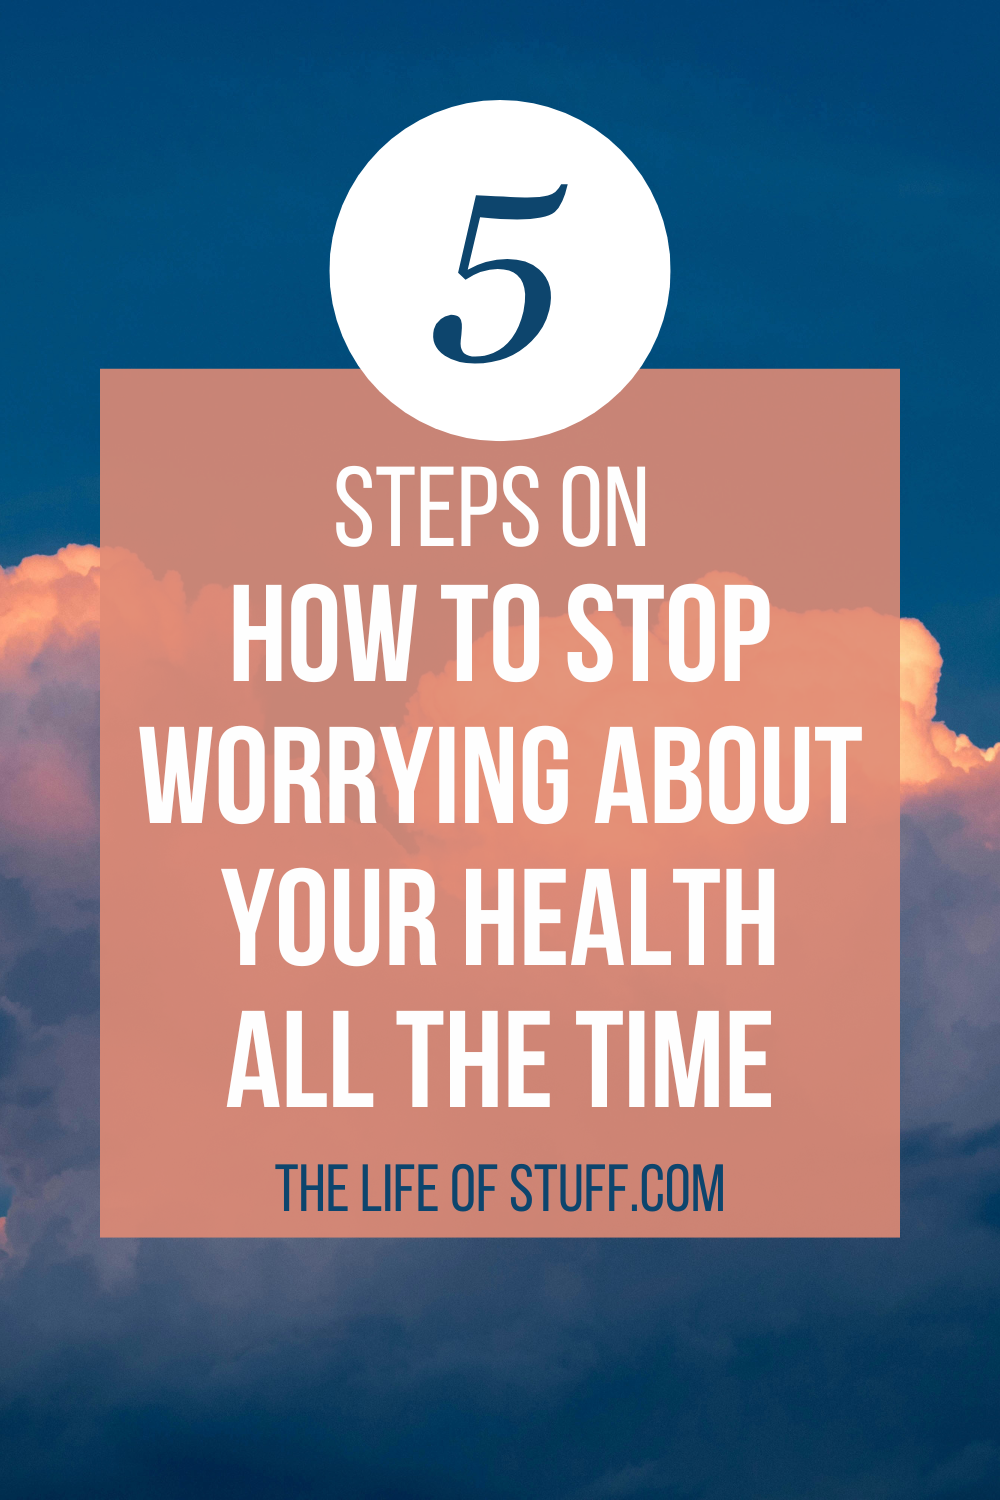 How To Stop Worrying About Your Health All The Time - The Life of Stuff